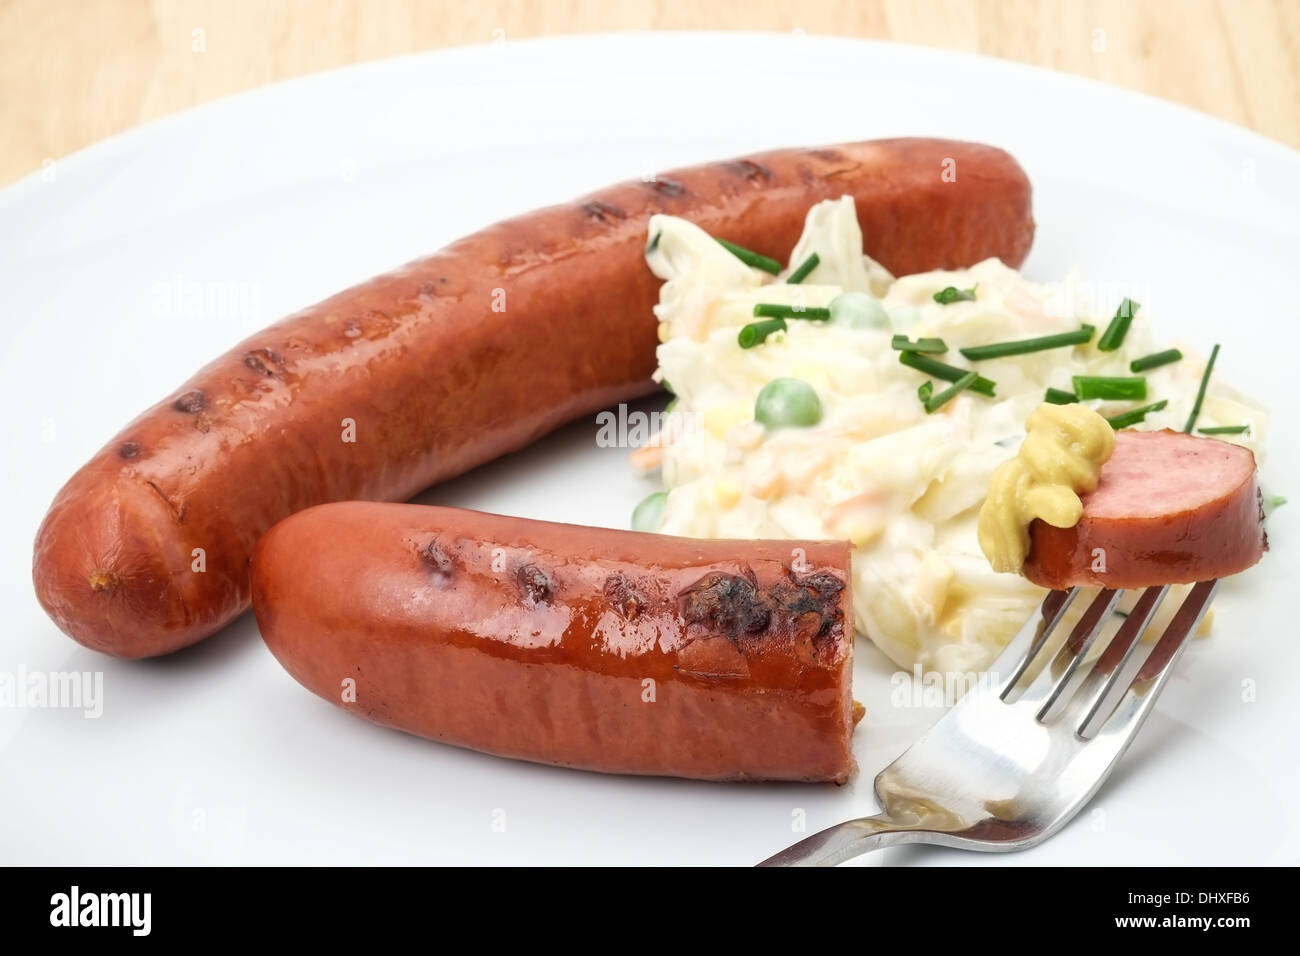 Close-up of a ready to eat German Bratwurst sausage served with ...